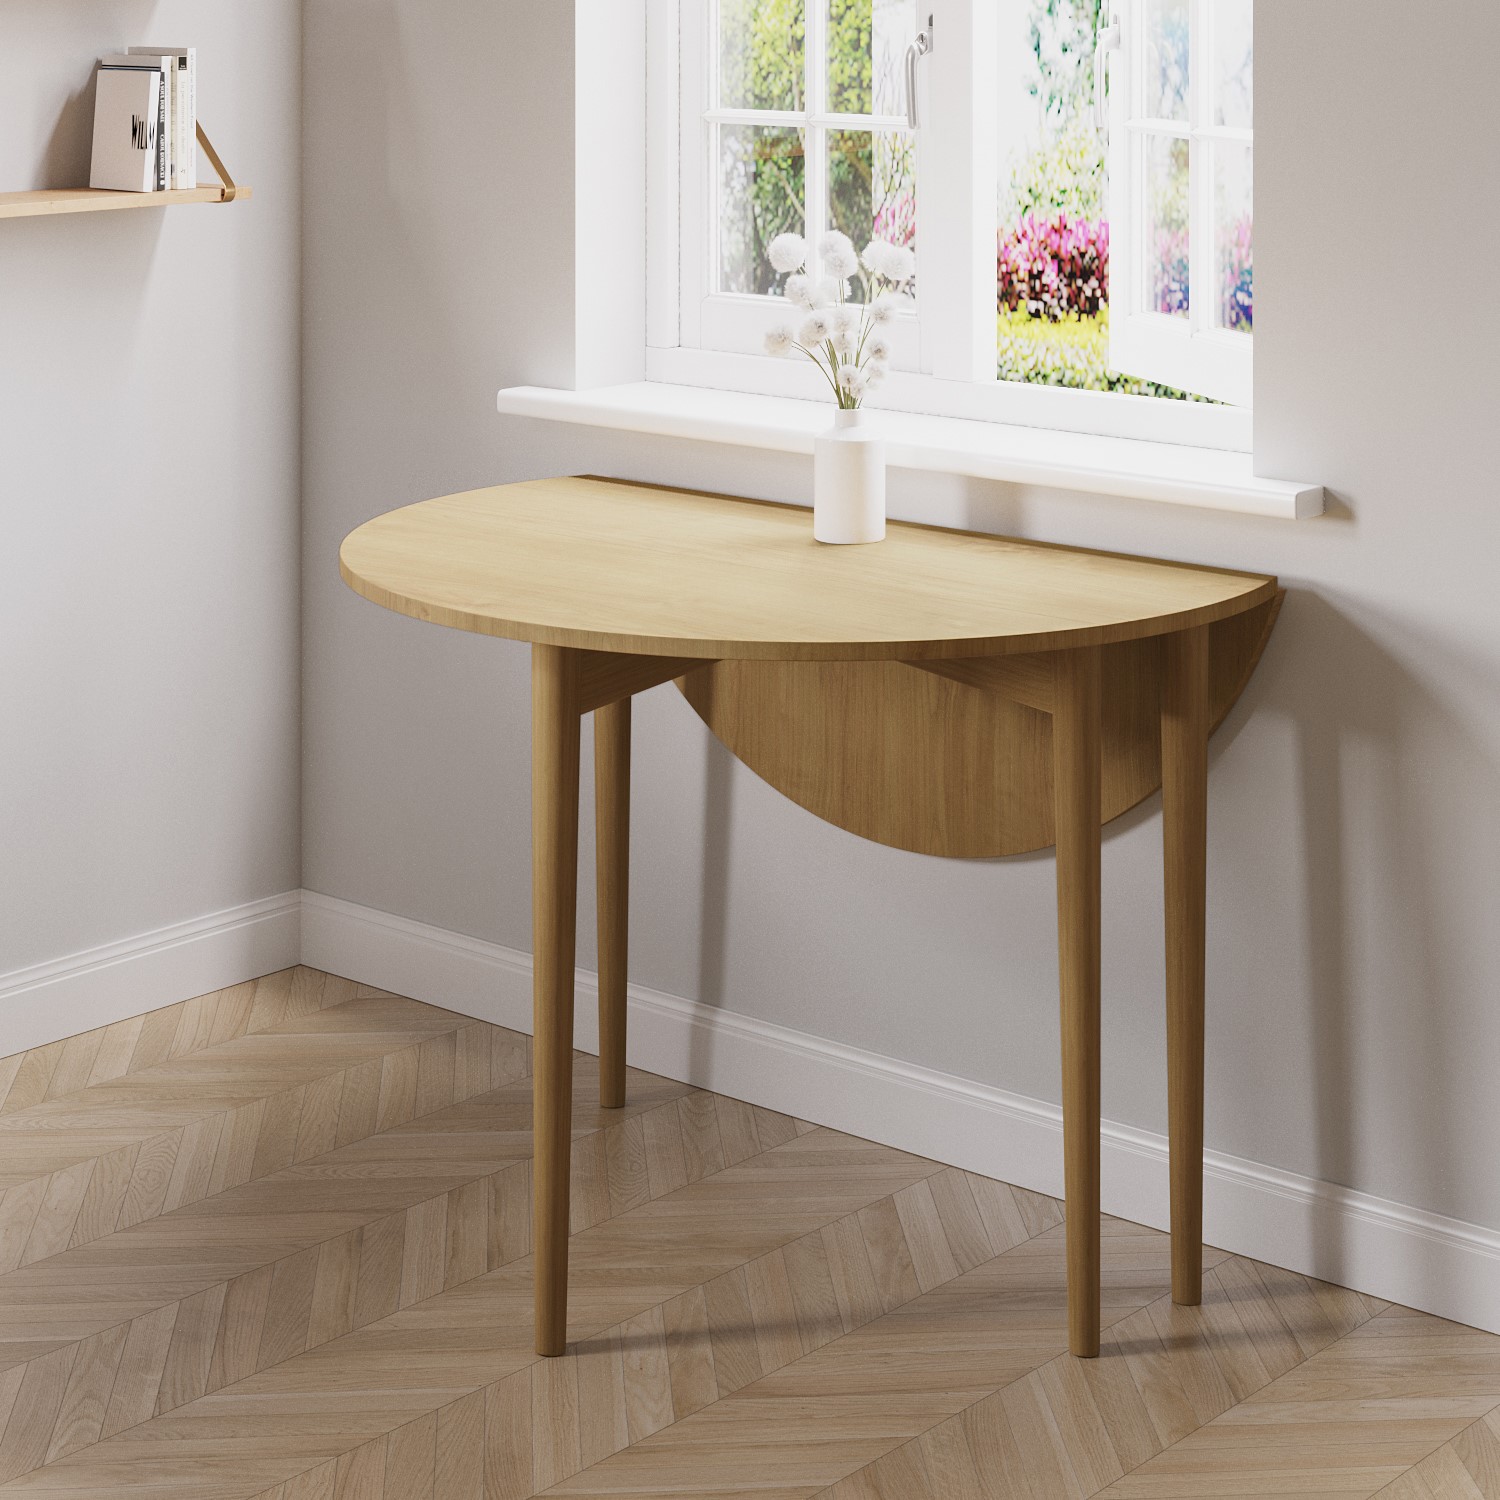 Photo of Small round oak folding drop leaf dining table - seats 2-4 - rudy